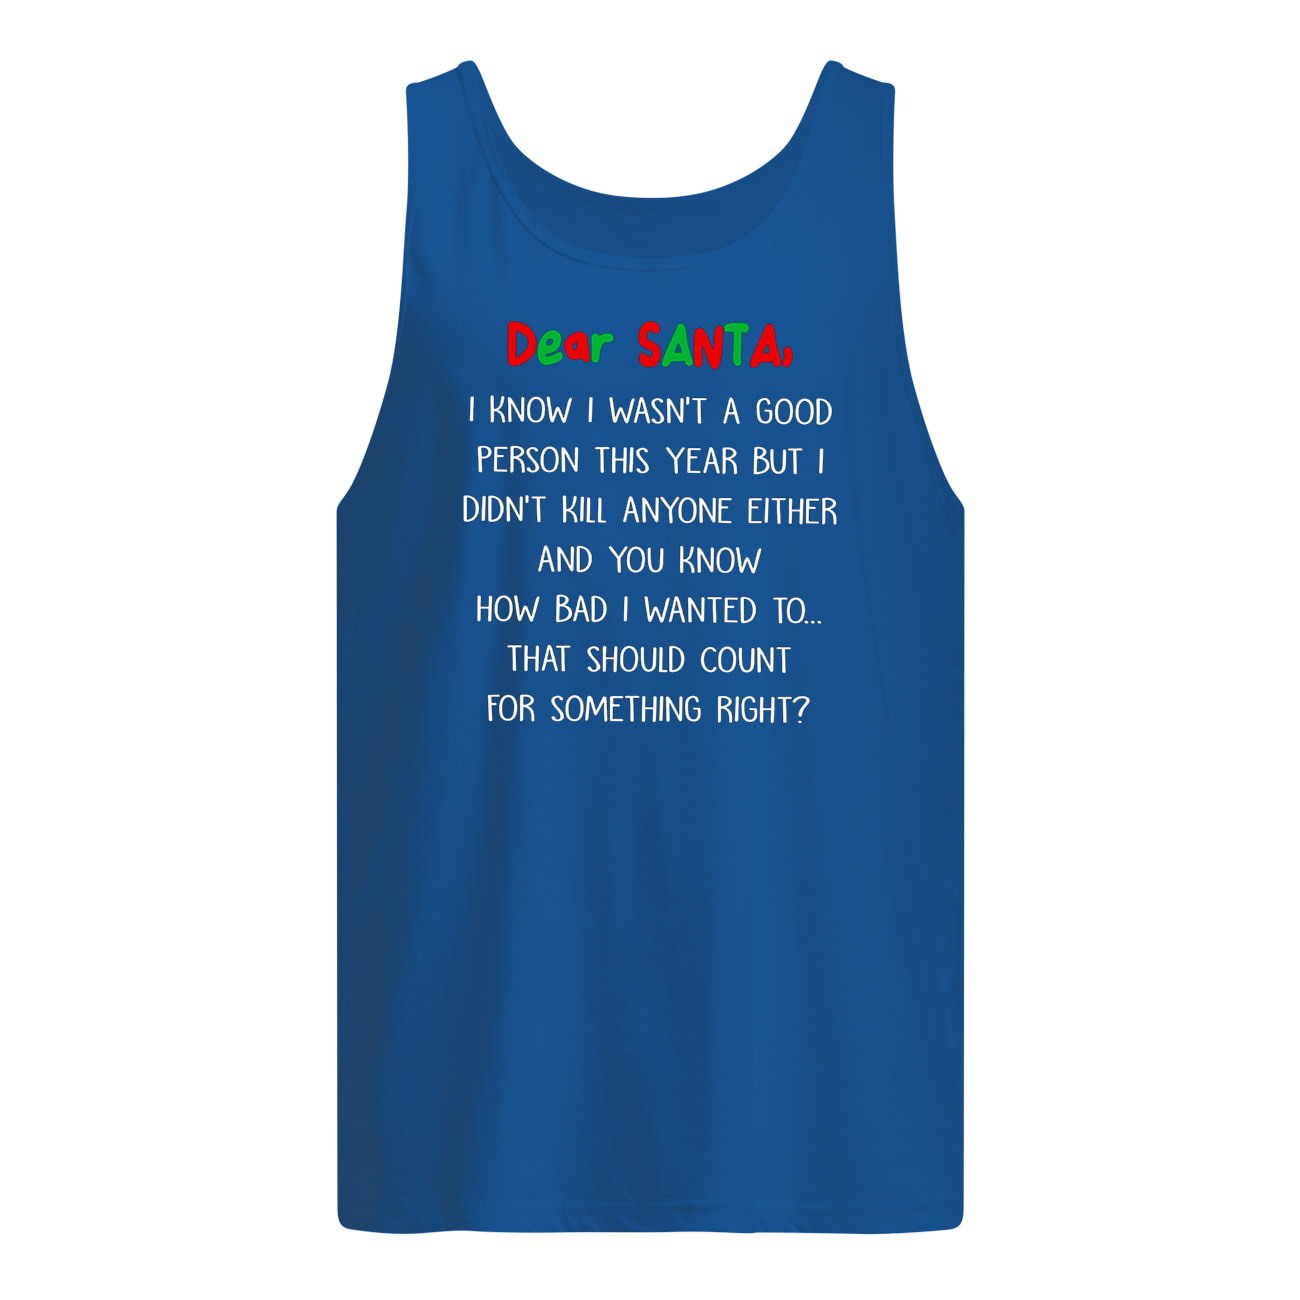 Dear santa I know I wasn't a good person this year but I didn't kill anyone either christmas tank top